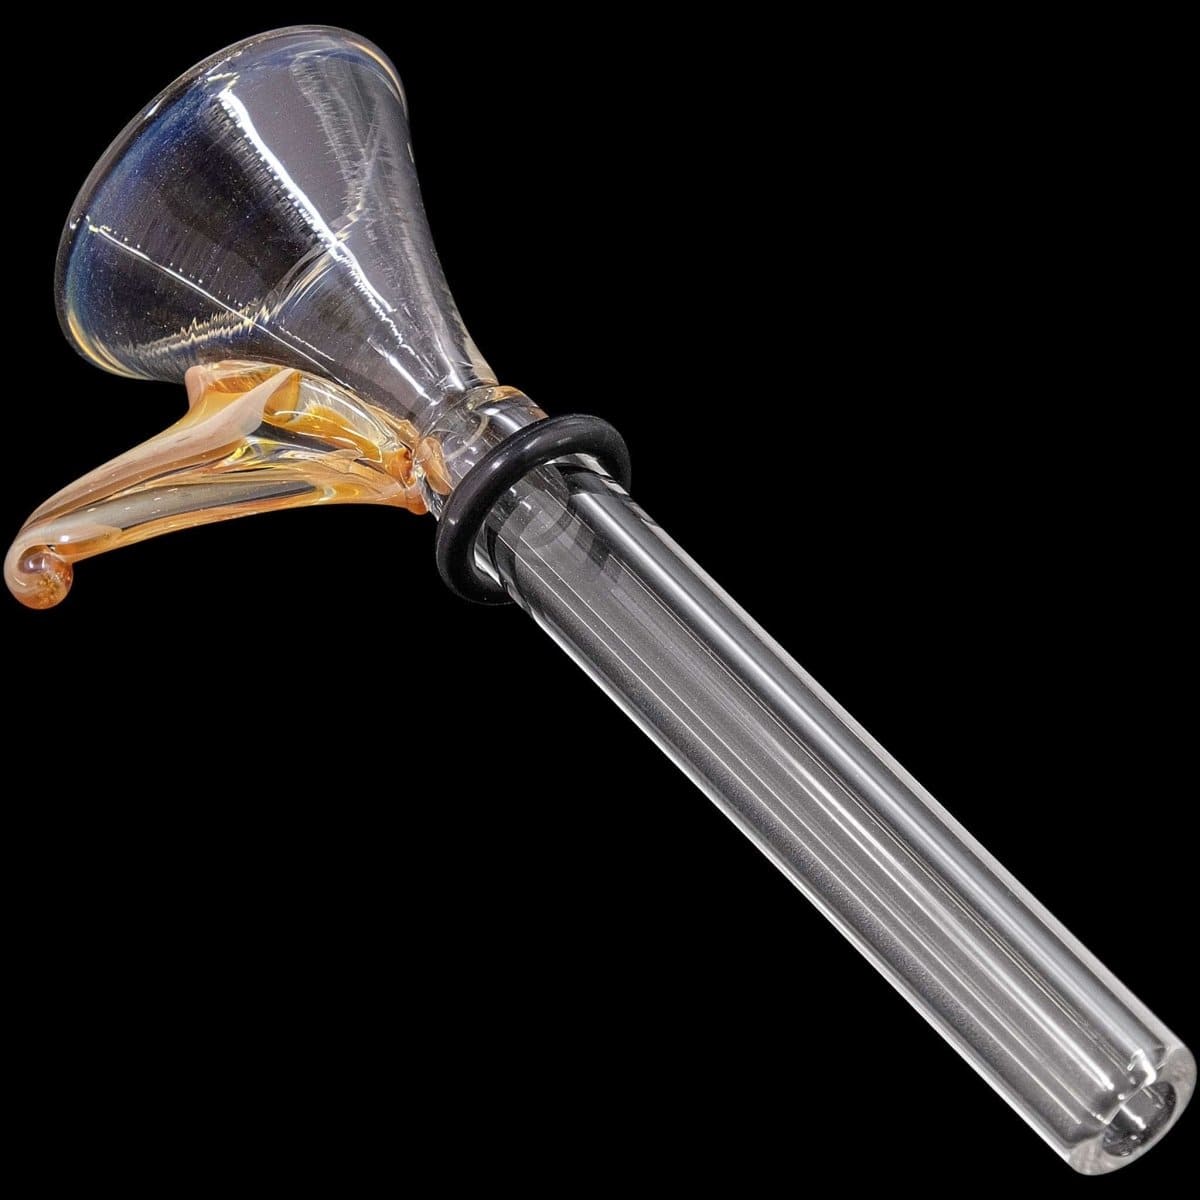 LA Pipes Smoking Accessory Amber 9mm Funnel Slide Bowl with Handle for Pull-Stem Bongs